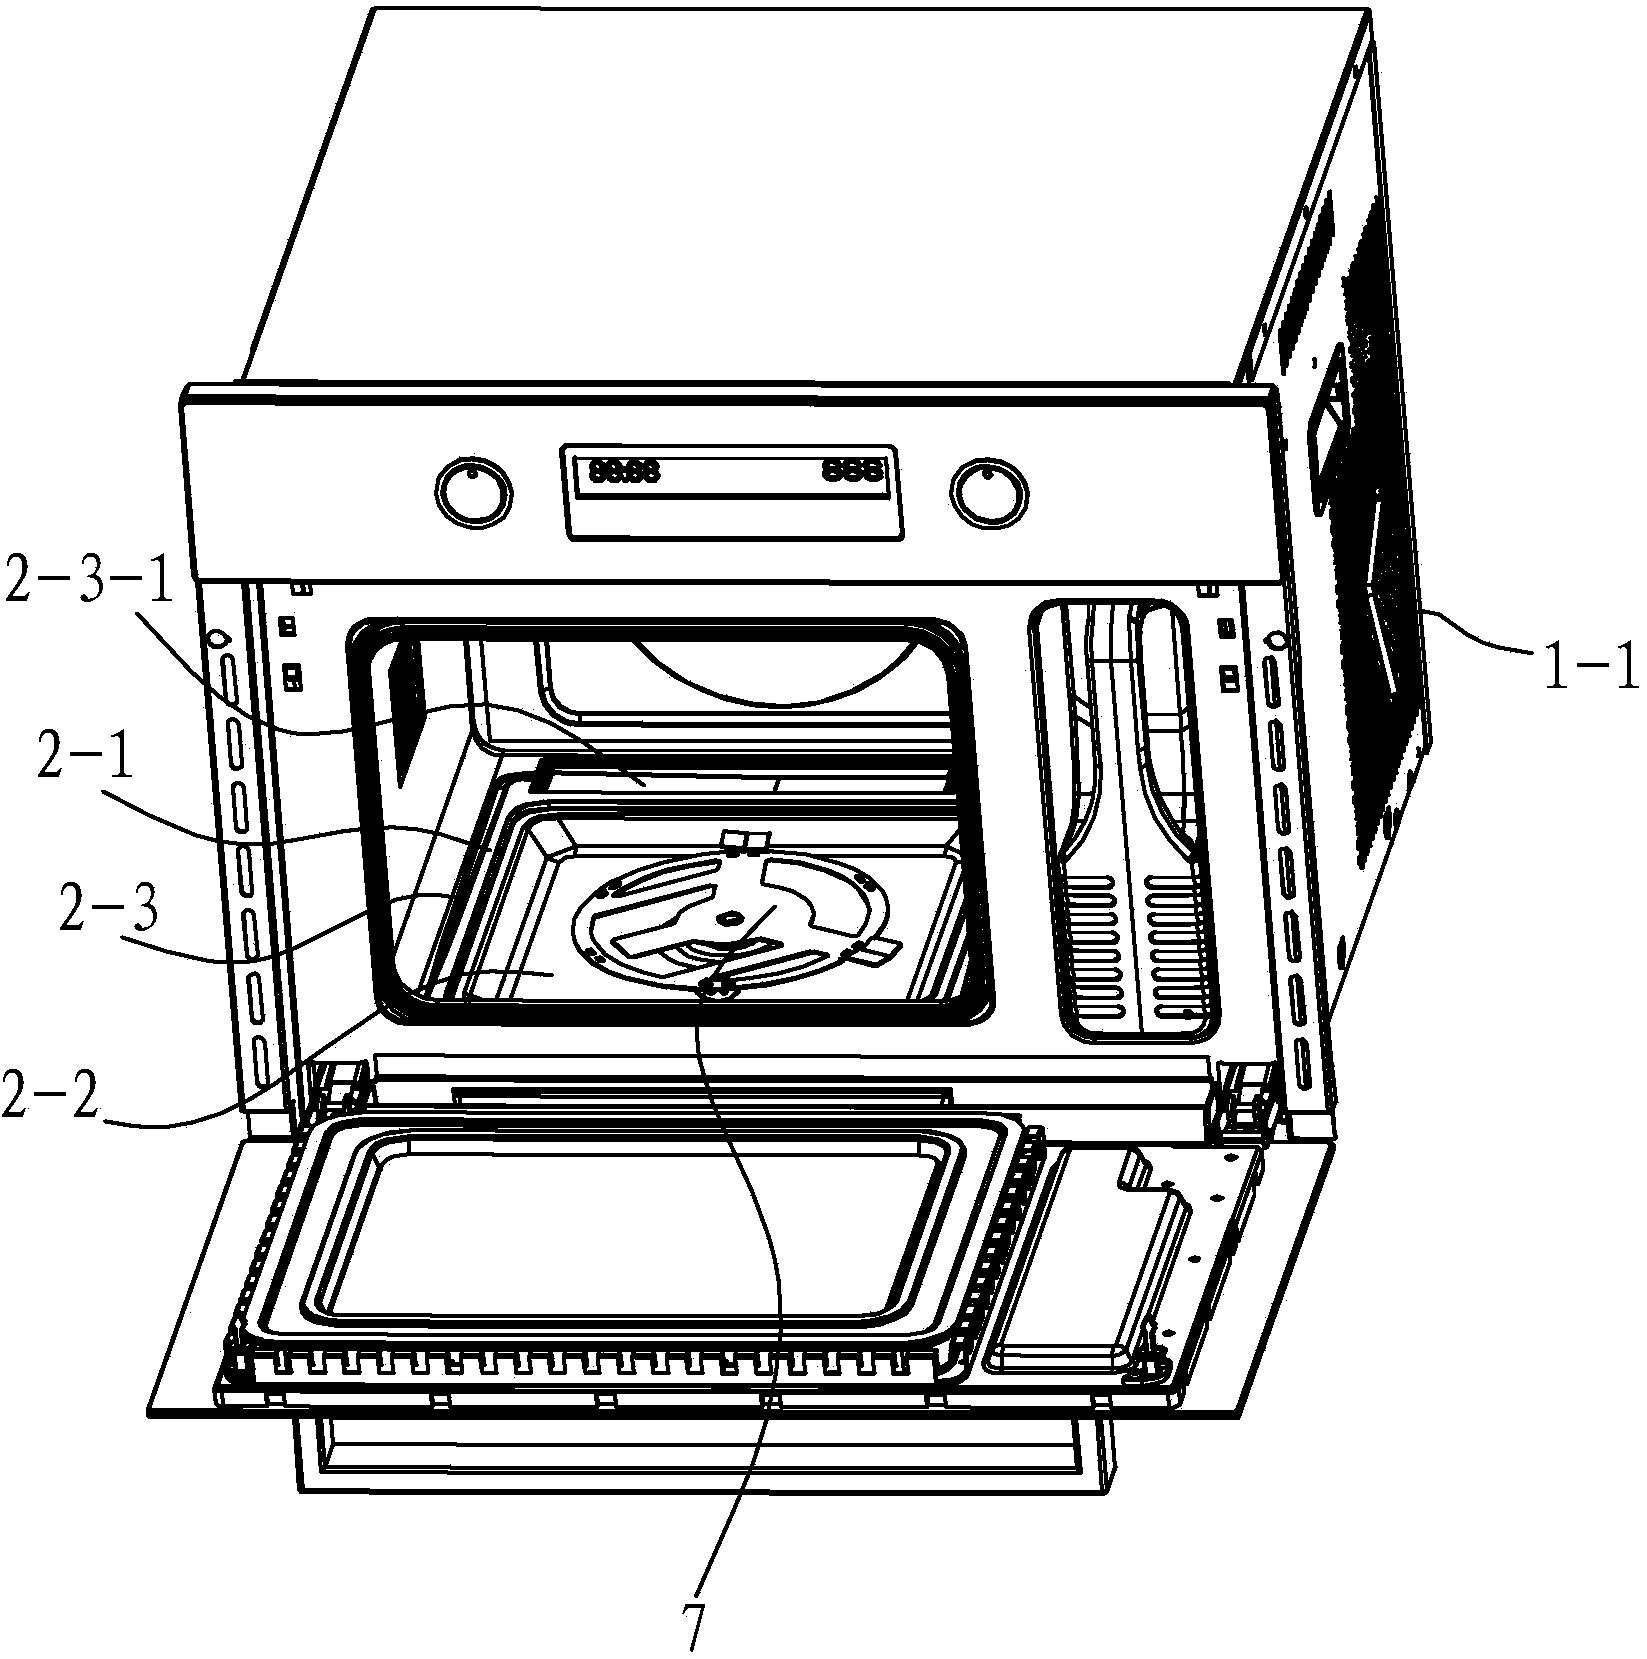 Steam box and microwave oven all-in-one machine